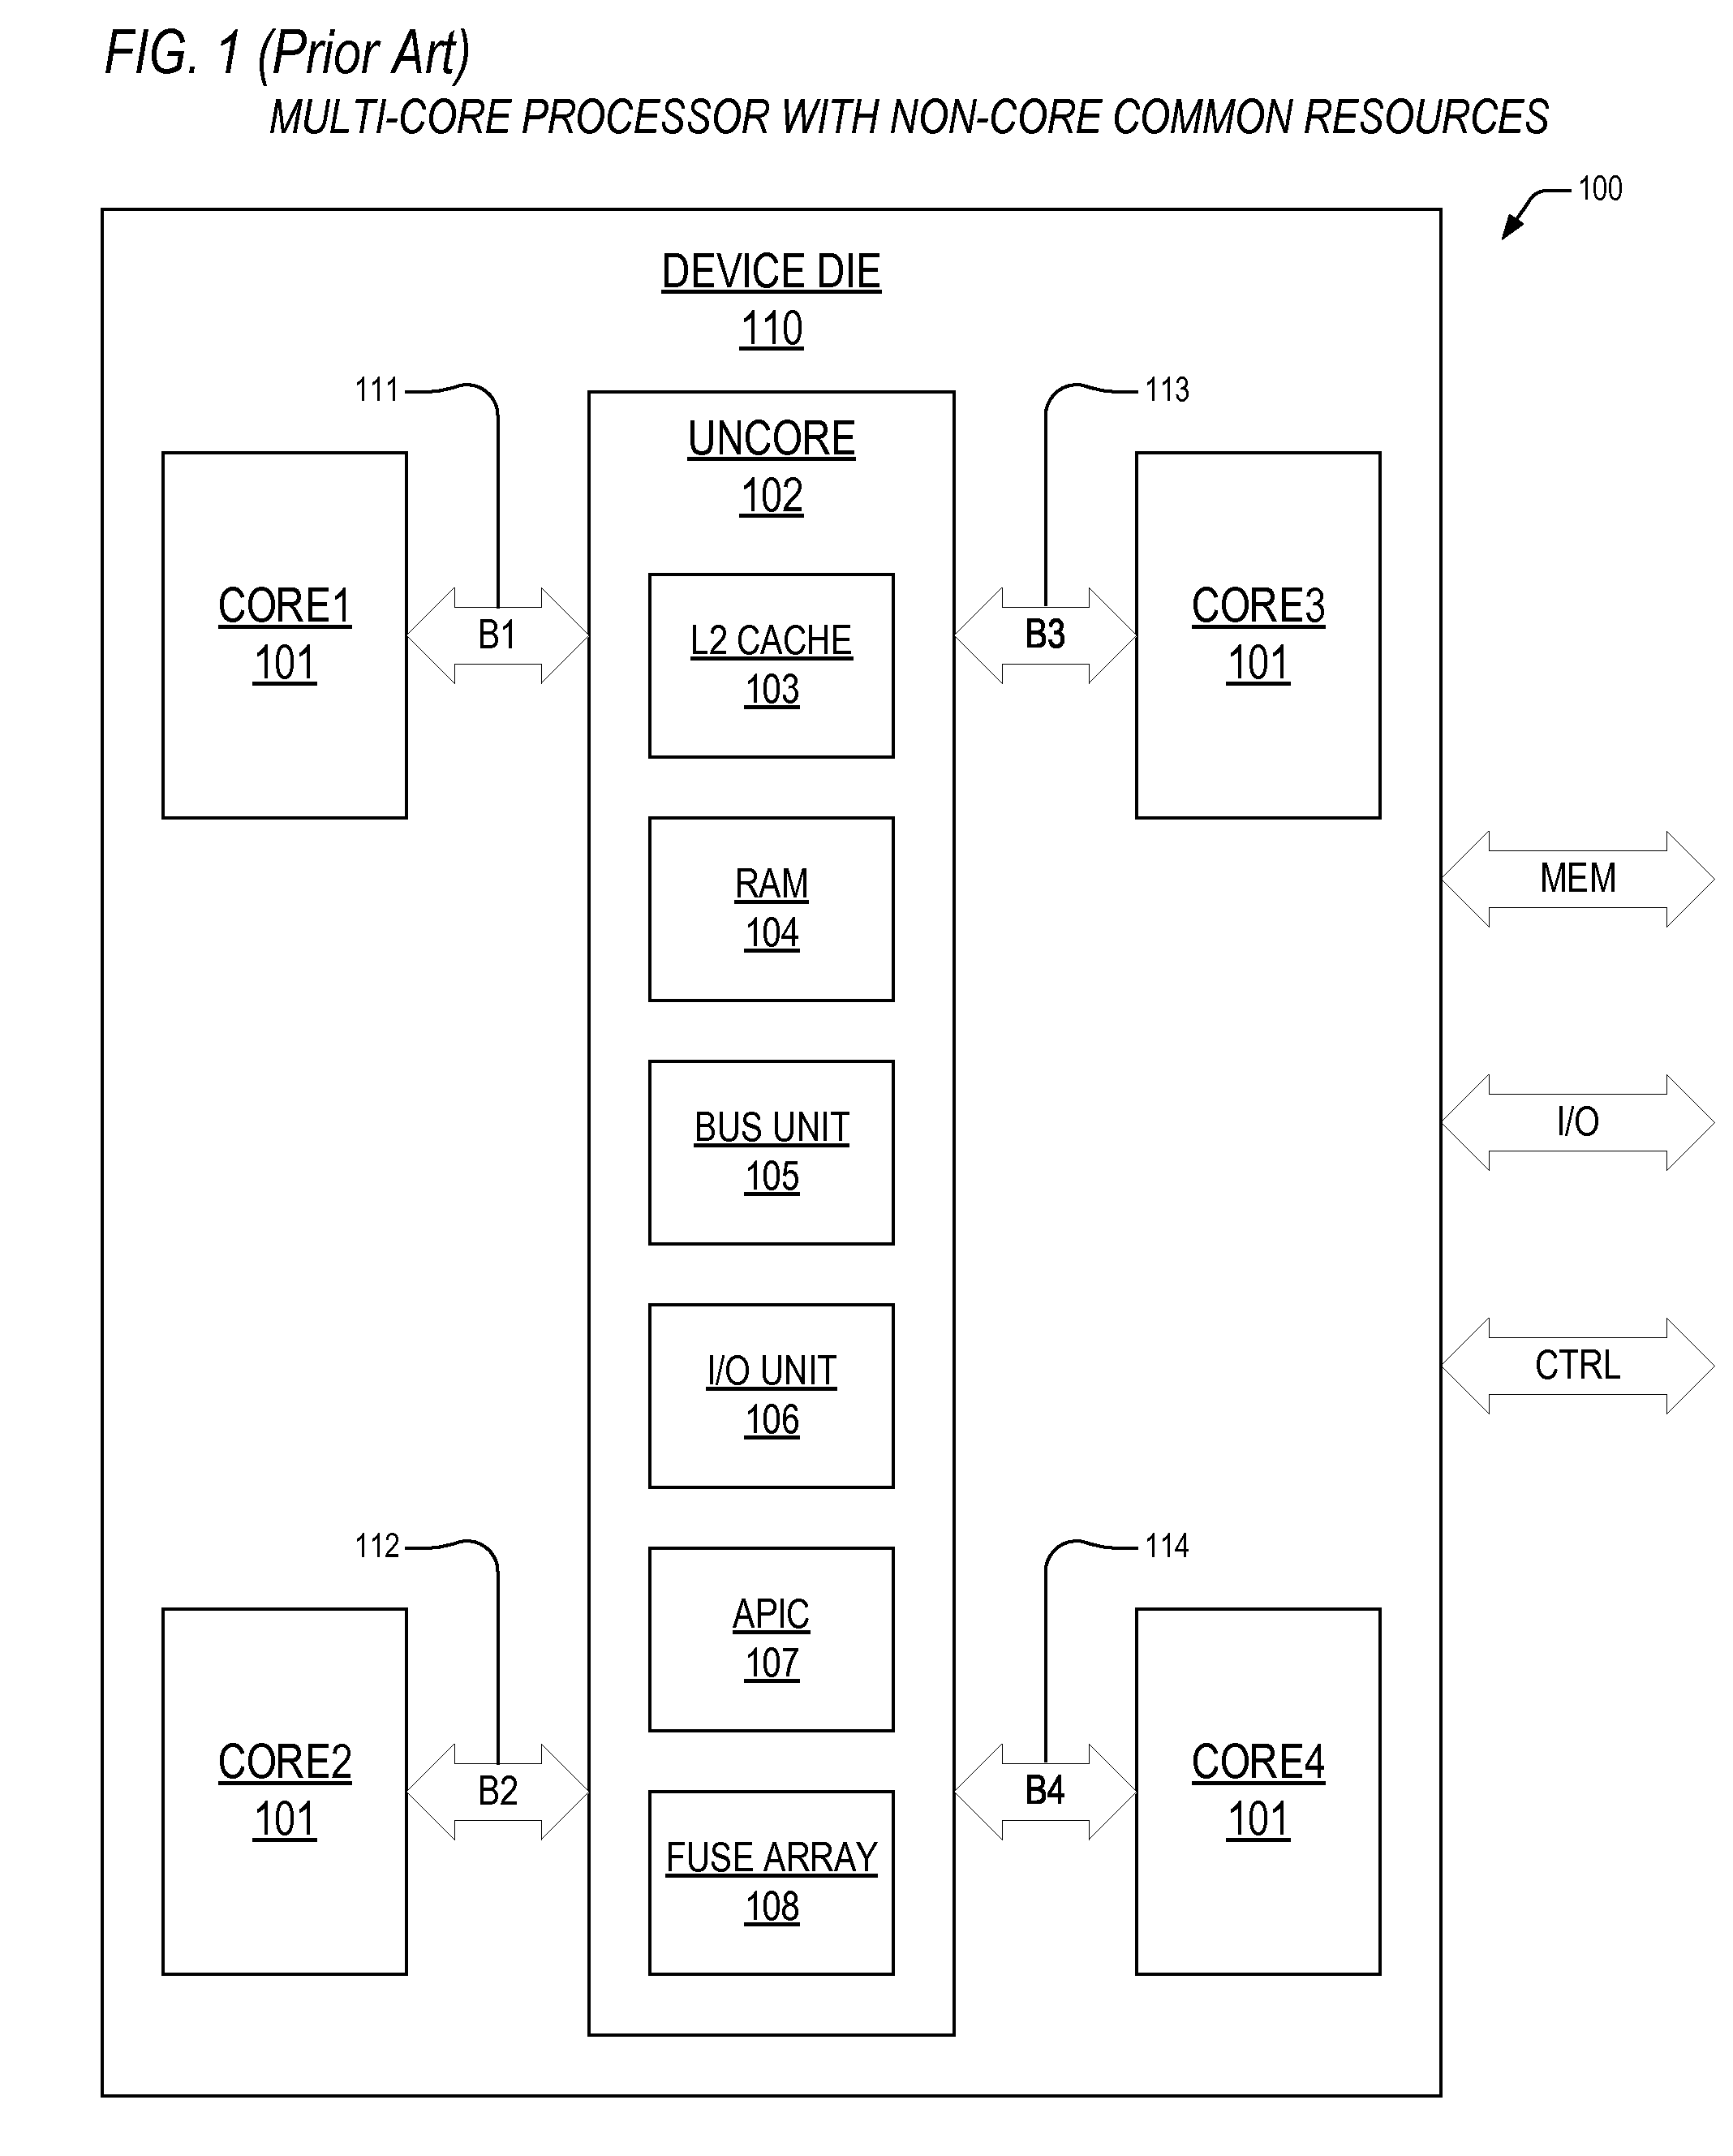 Apparatus and method to preclude x86 special bus cycle load replays in an out-of-order processor